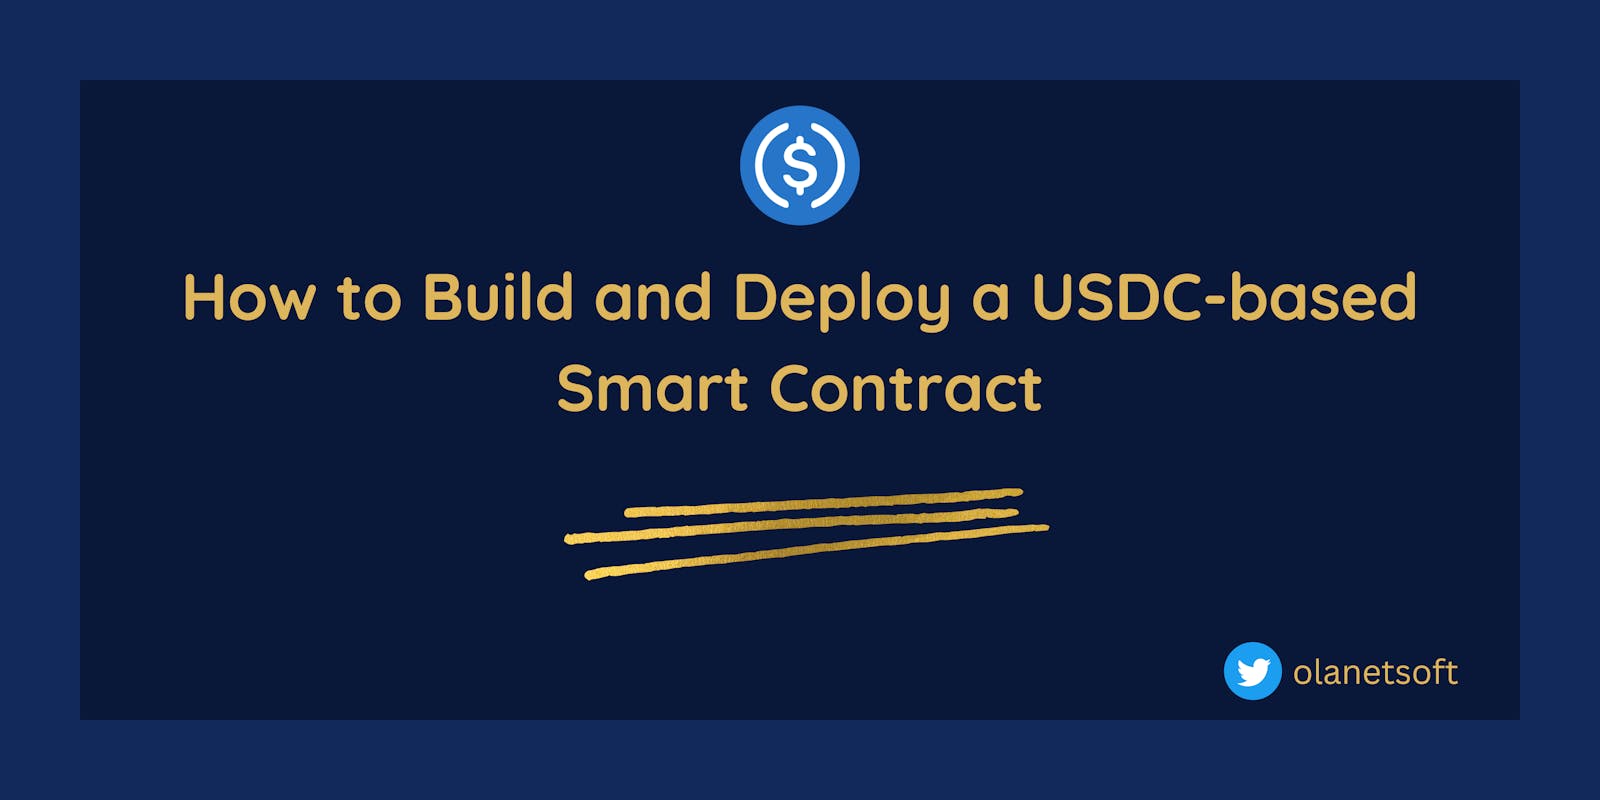 How to Build and Deploy a USDC-based Smart Contract